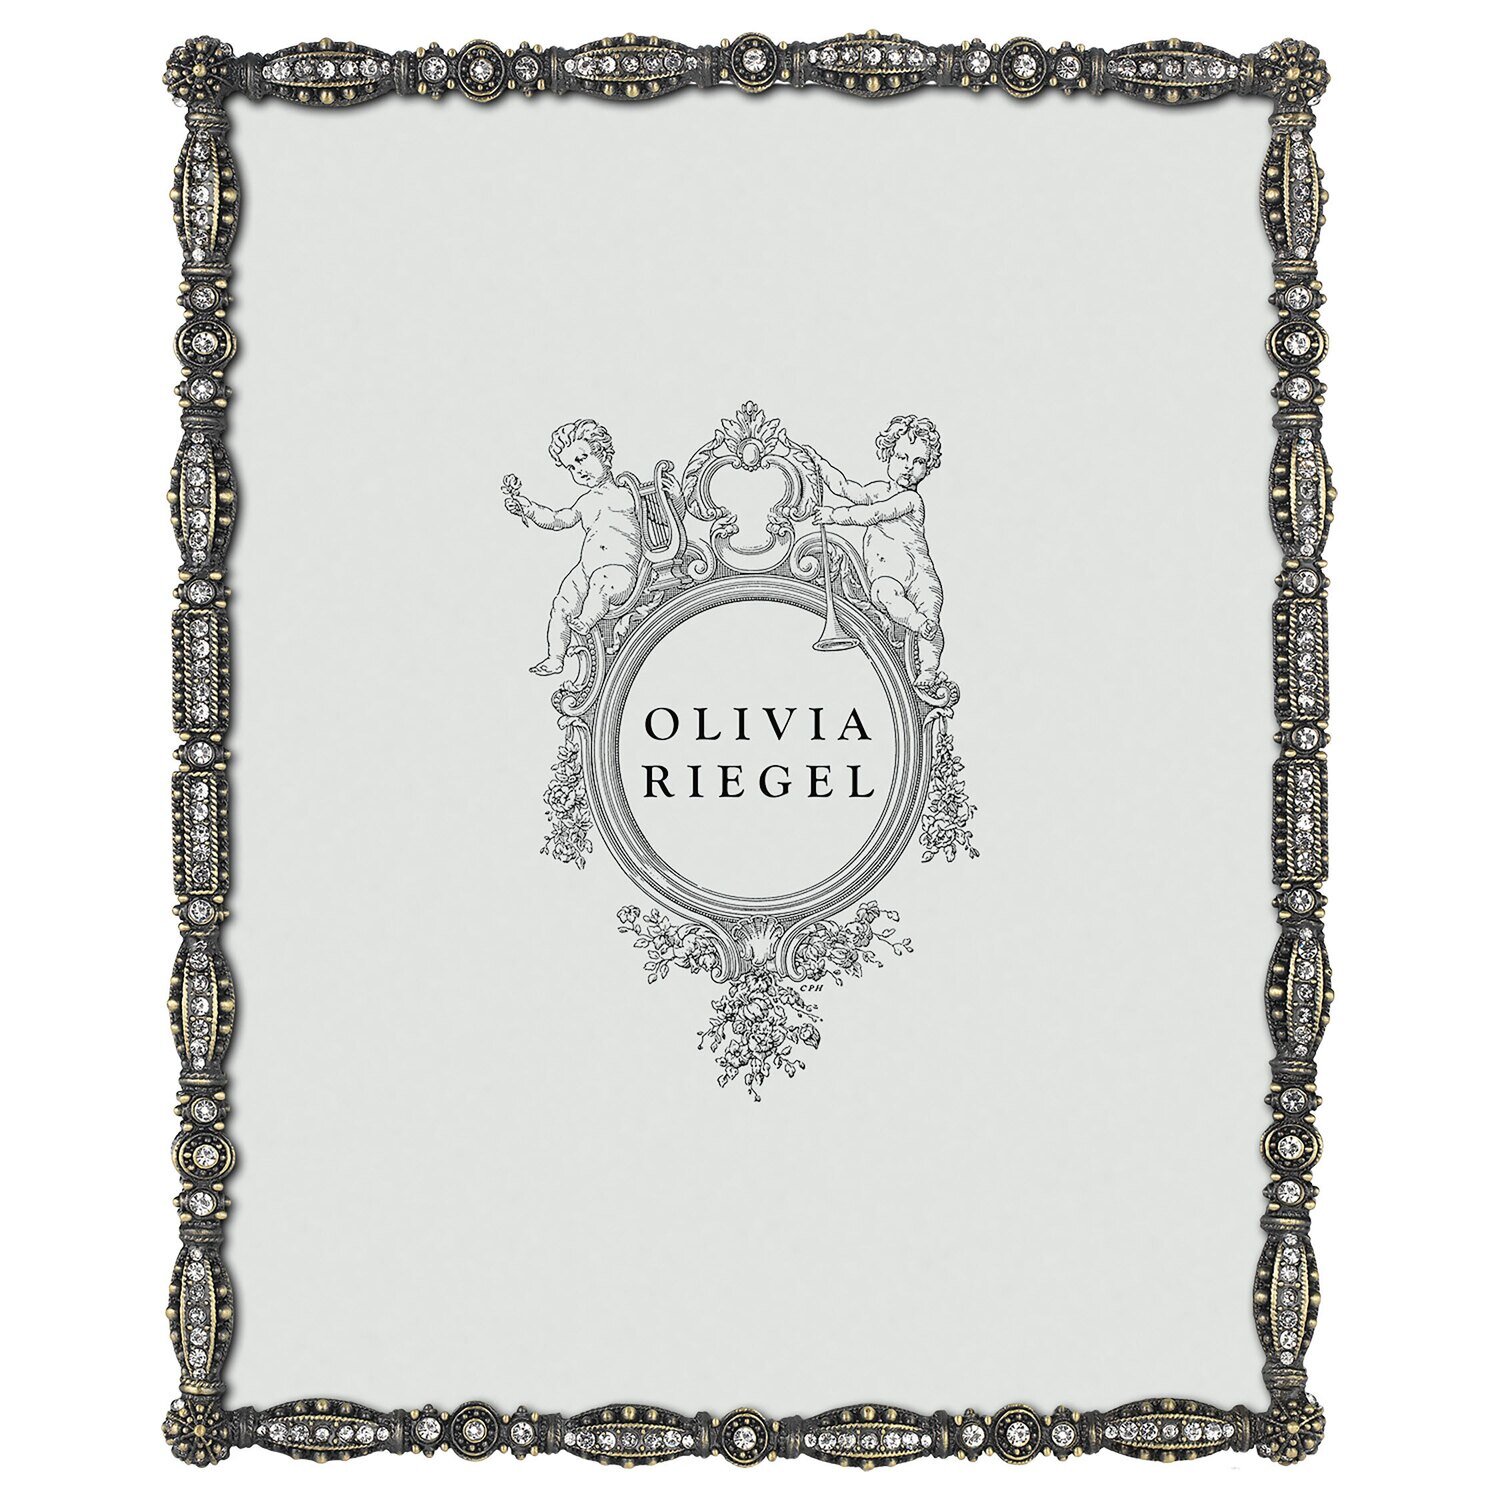 Olivia Riegel Bronze Asbury 8 x 10 Inch Picture Frame RT4843